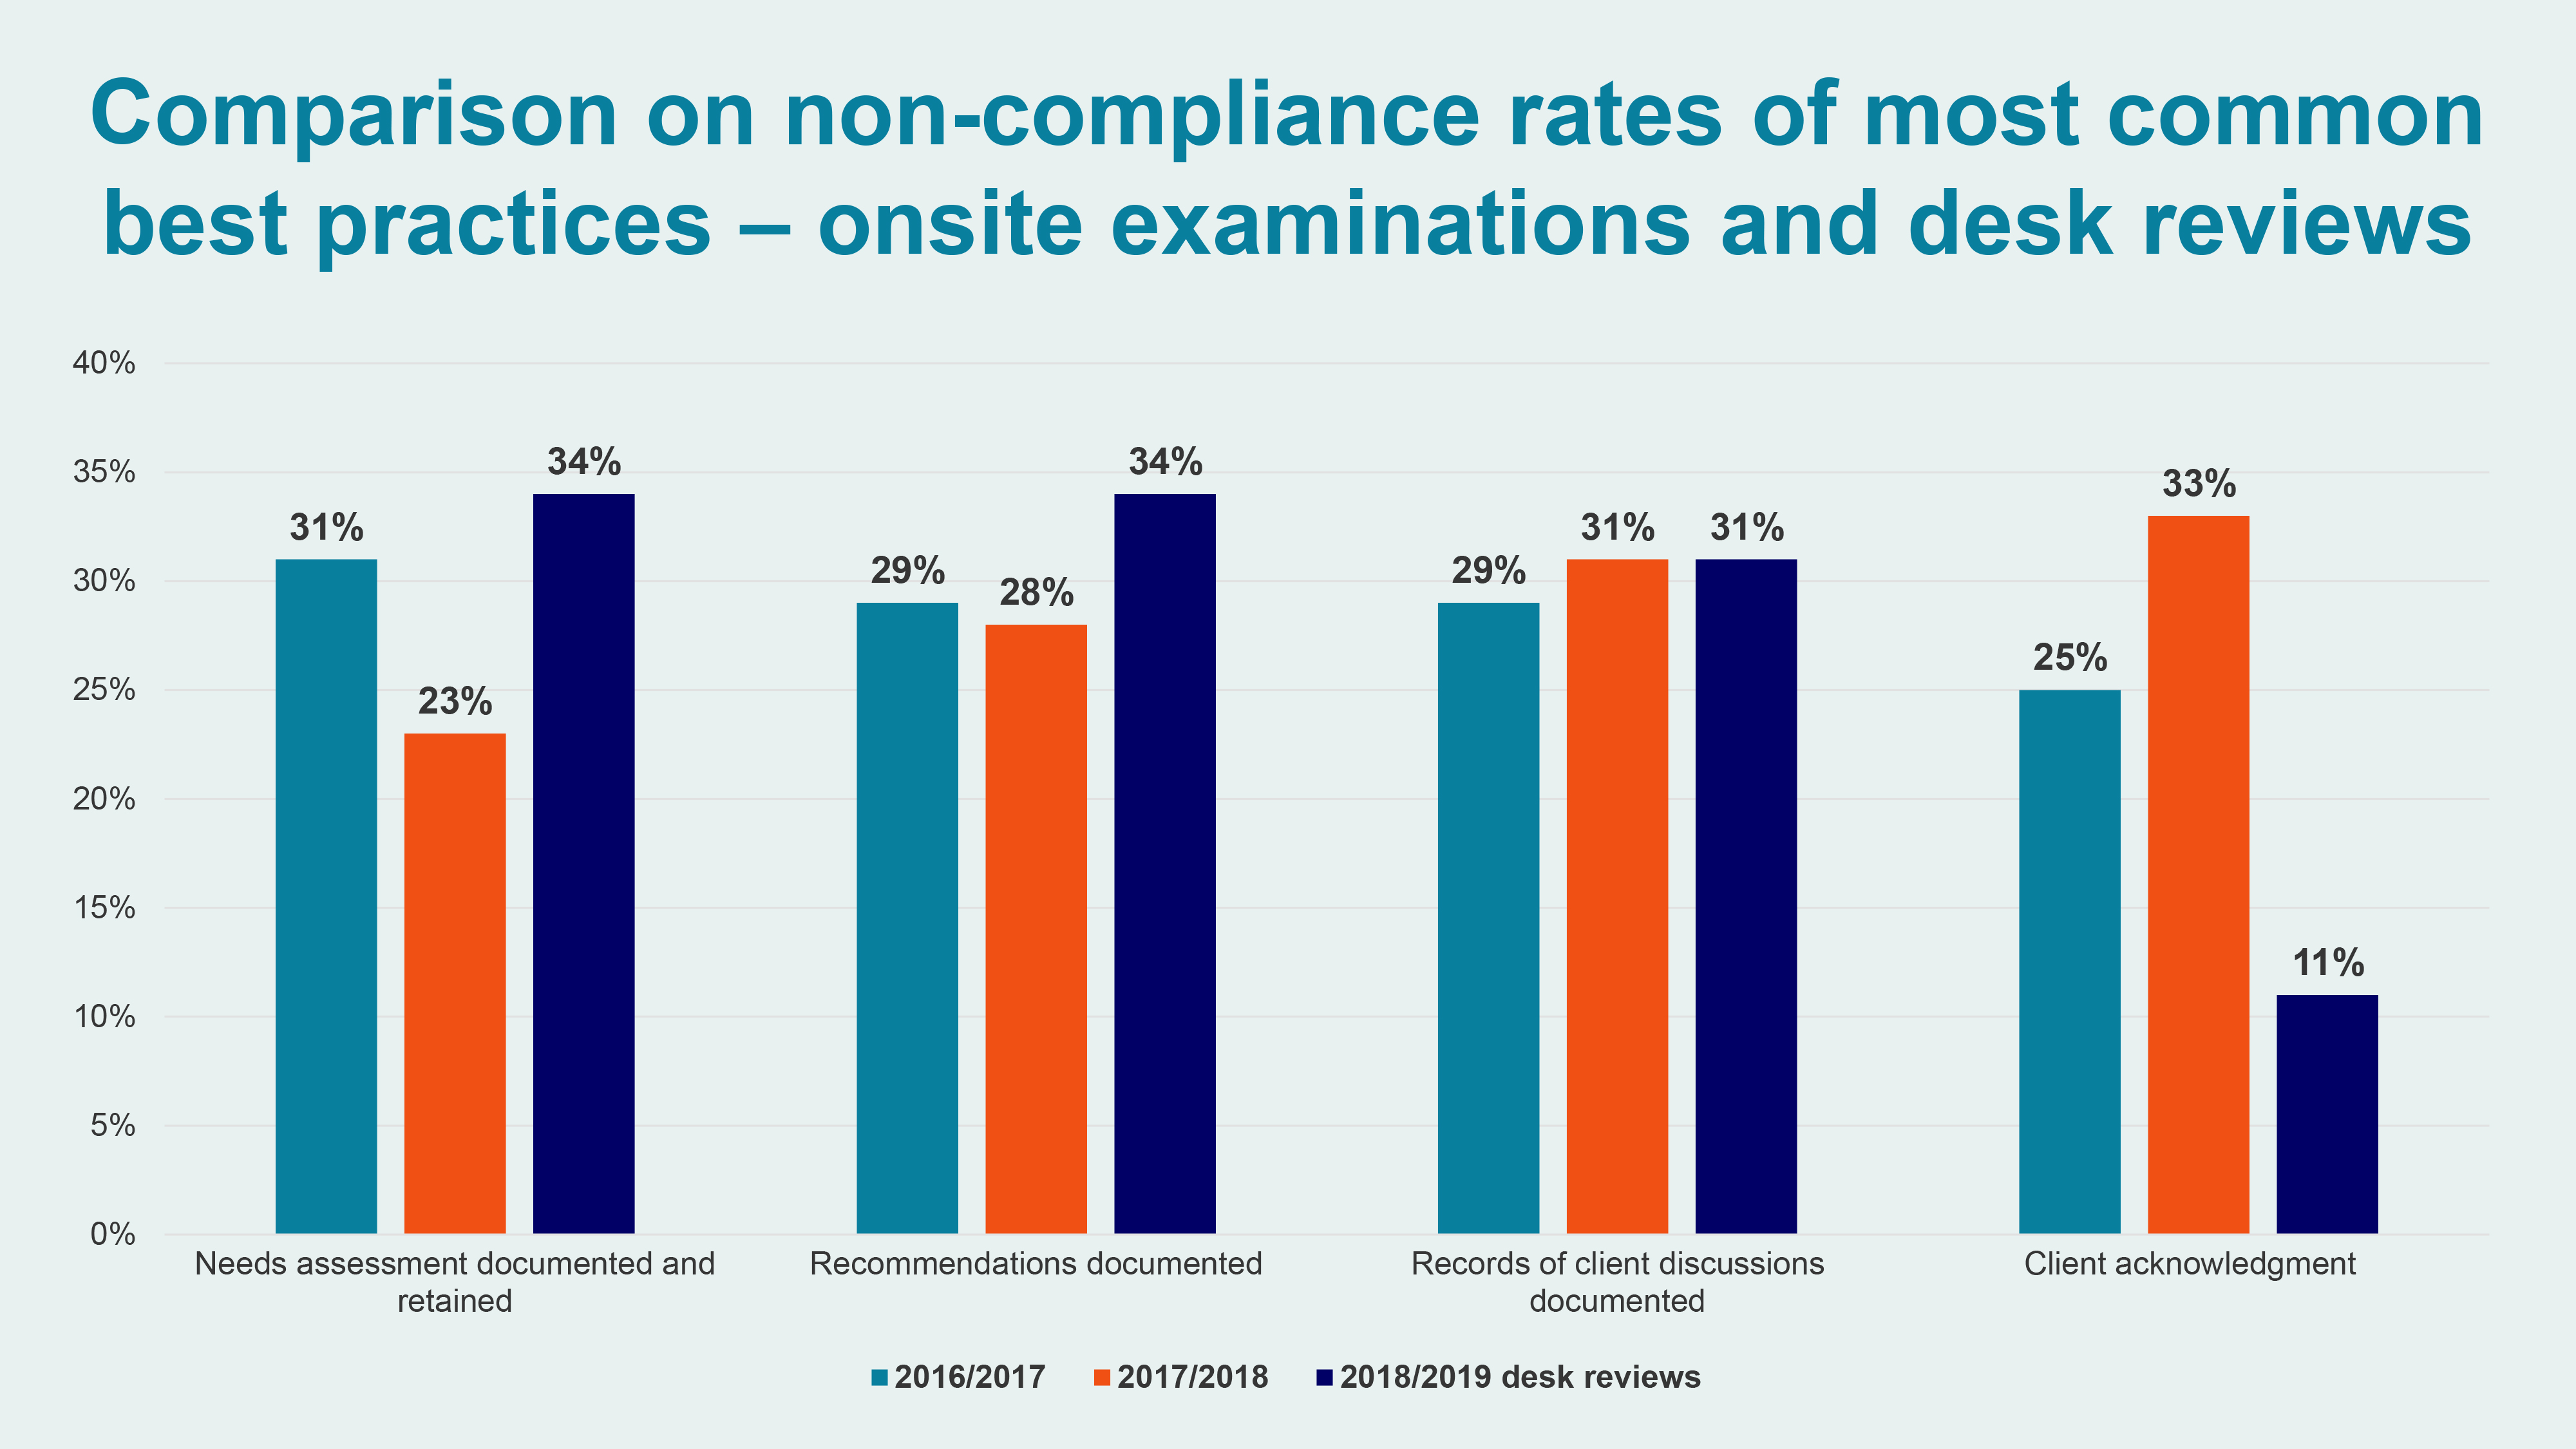 Comparison of Non-Compliance Rates of Most Common Best Practices - Onsite Examinations and Desk Reviews